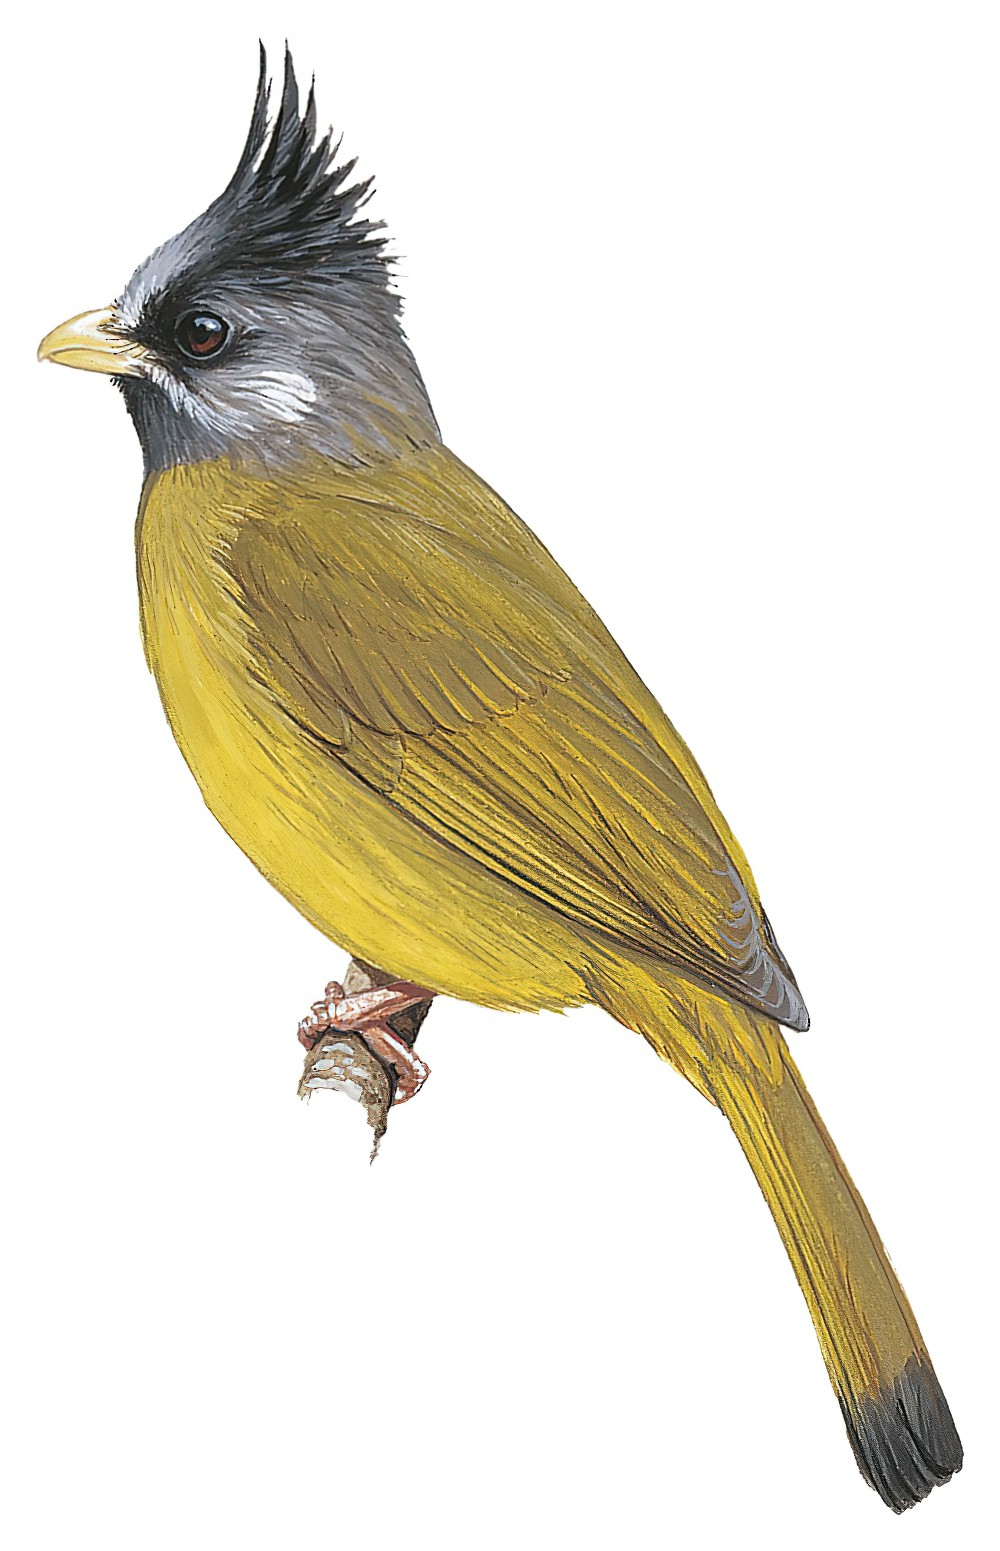 Crested Finchbill / Spizixos canifrons